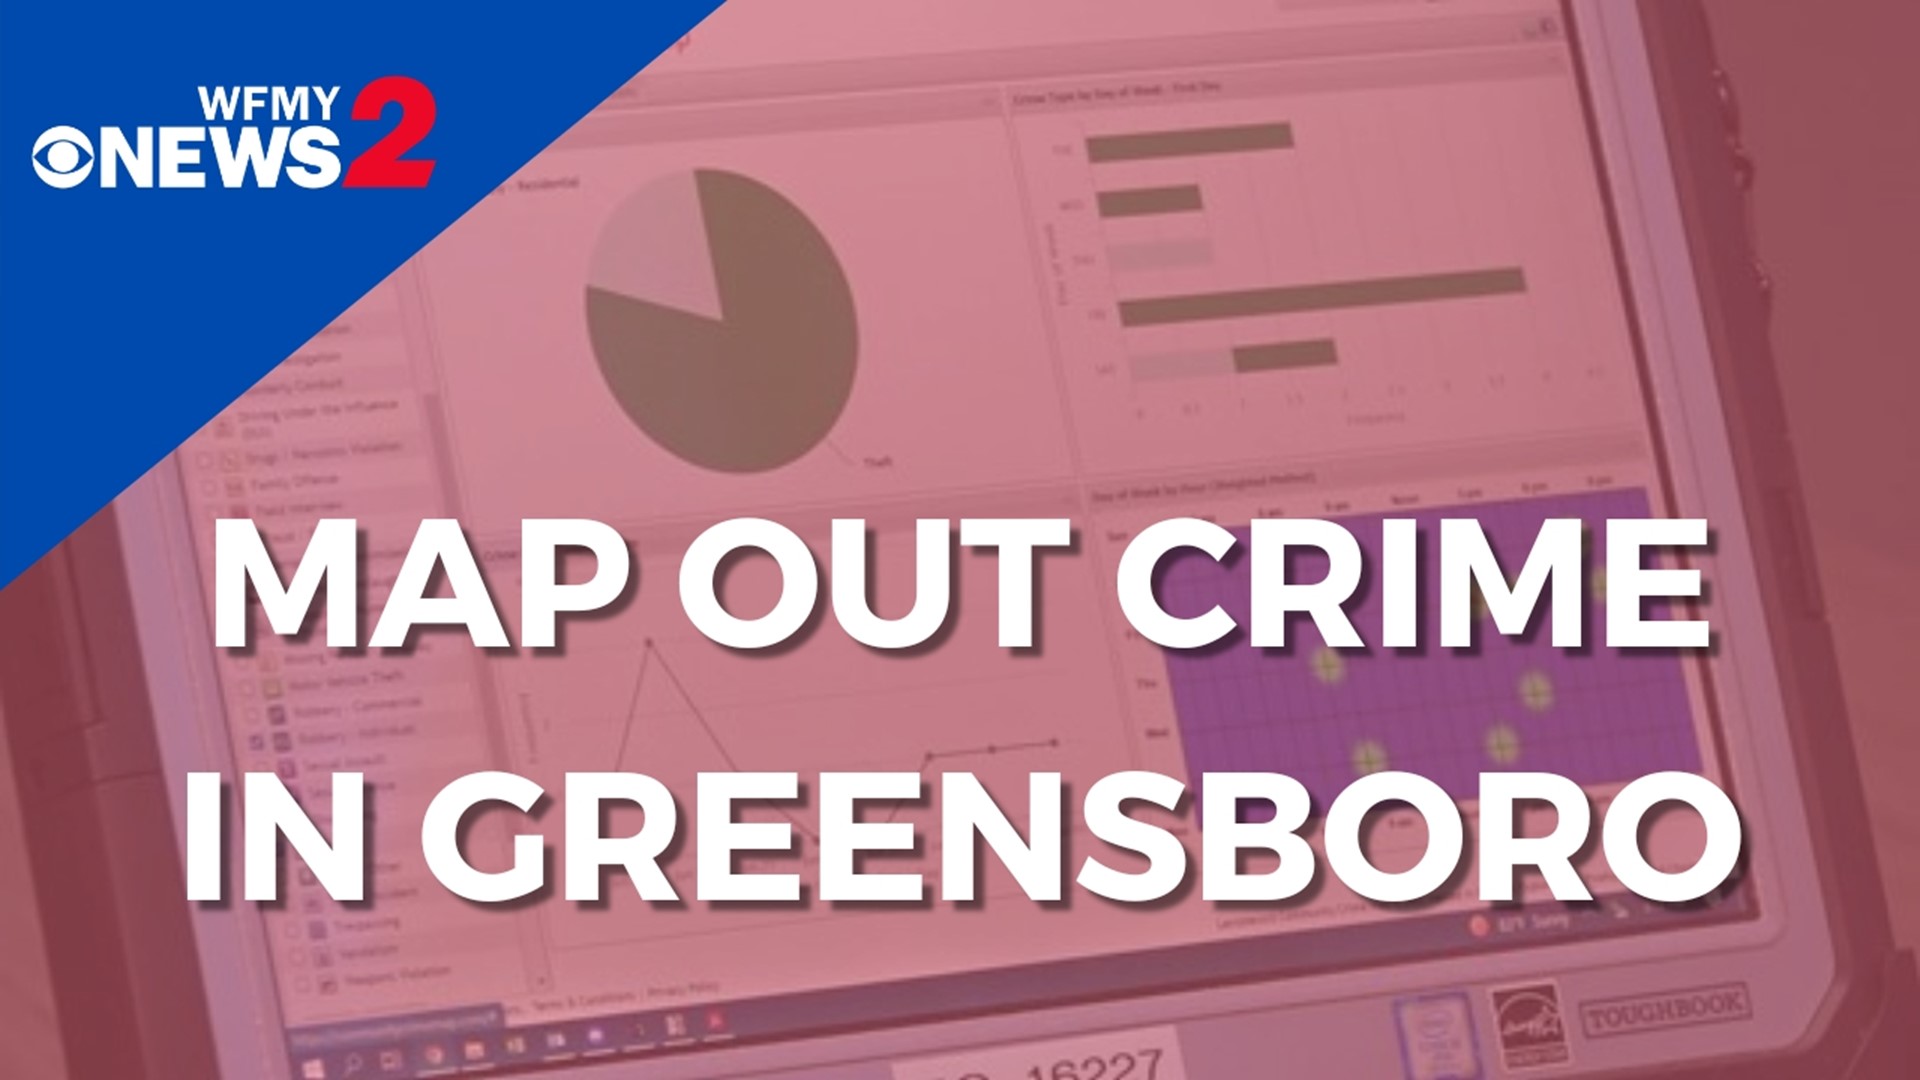 Greensboro residents can search for different crimes that happened in their community.